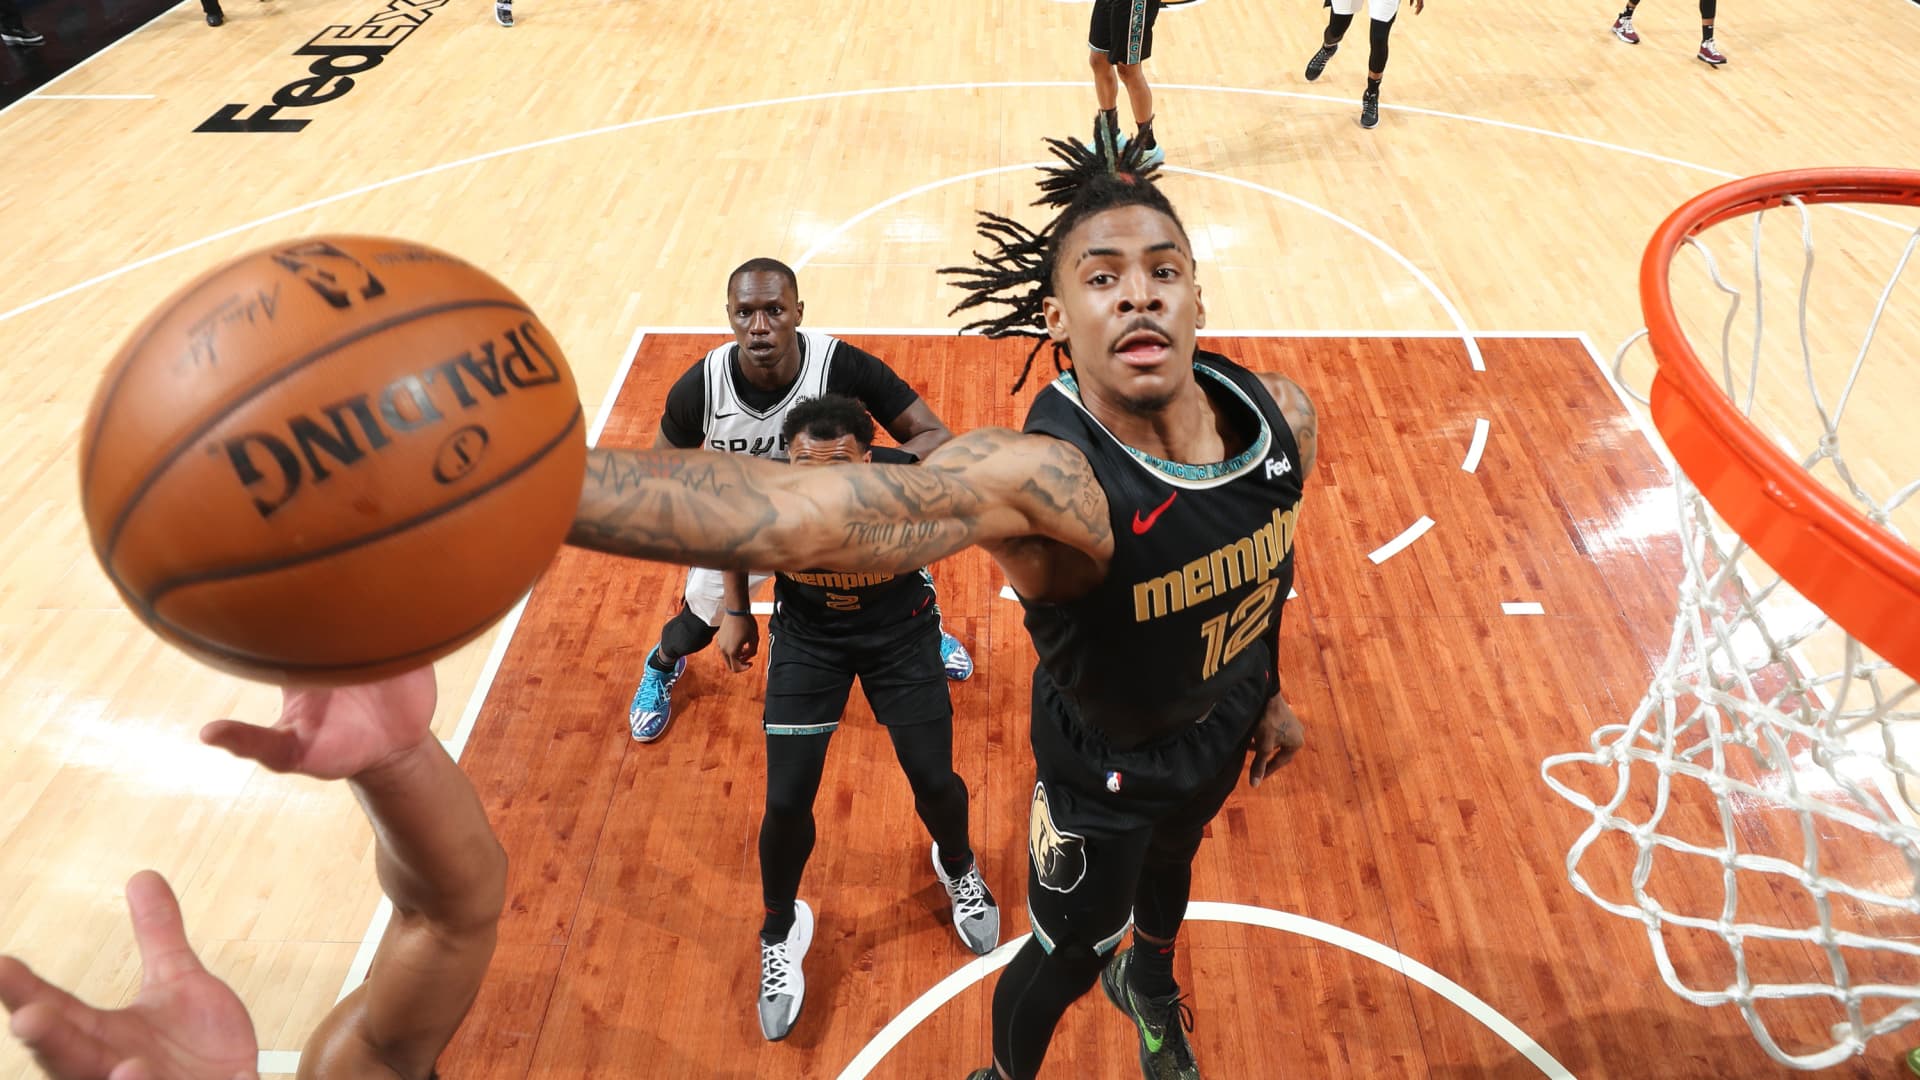 Ja Morant #12 of the Memphis Grizzlies rebounds the ball against the San Antonio Spurs during the 2021 NBA Play-In Tournament on May 19, 2021 at FedExForum in Memphis, Tennessee.